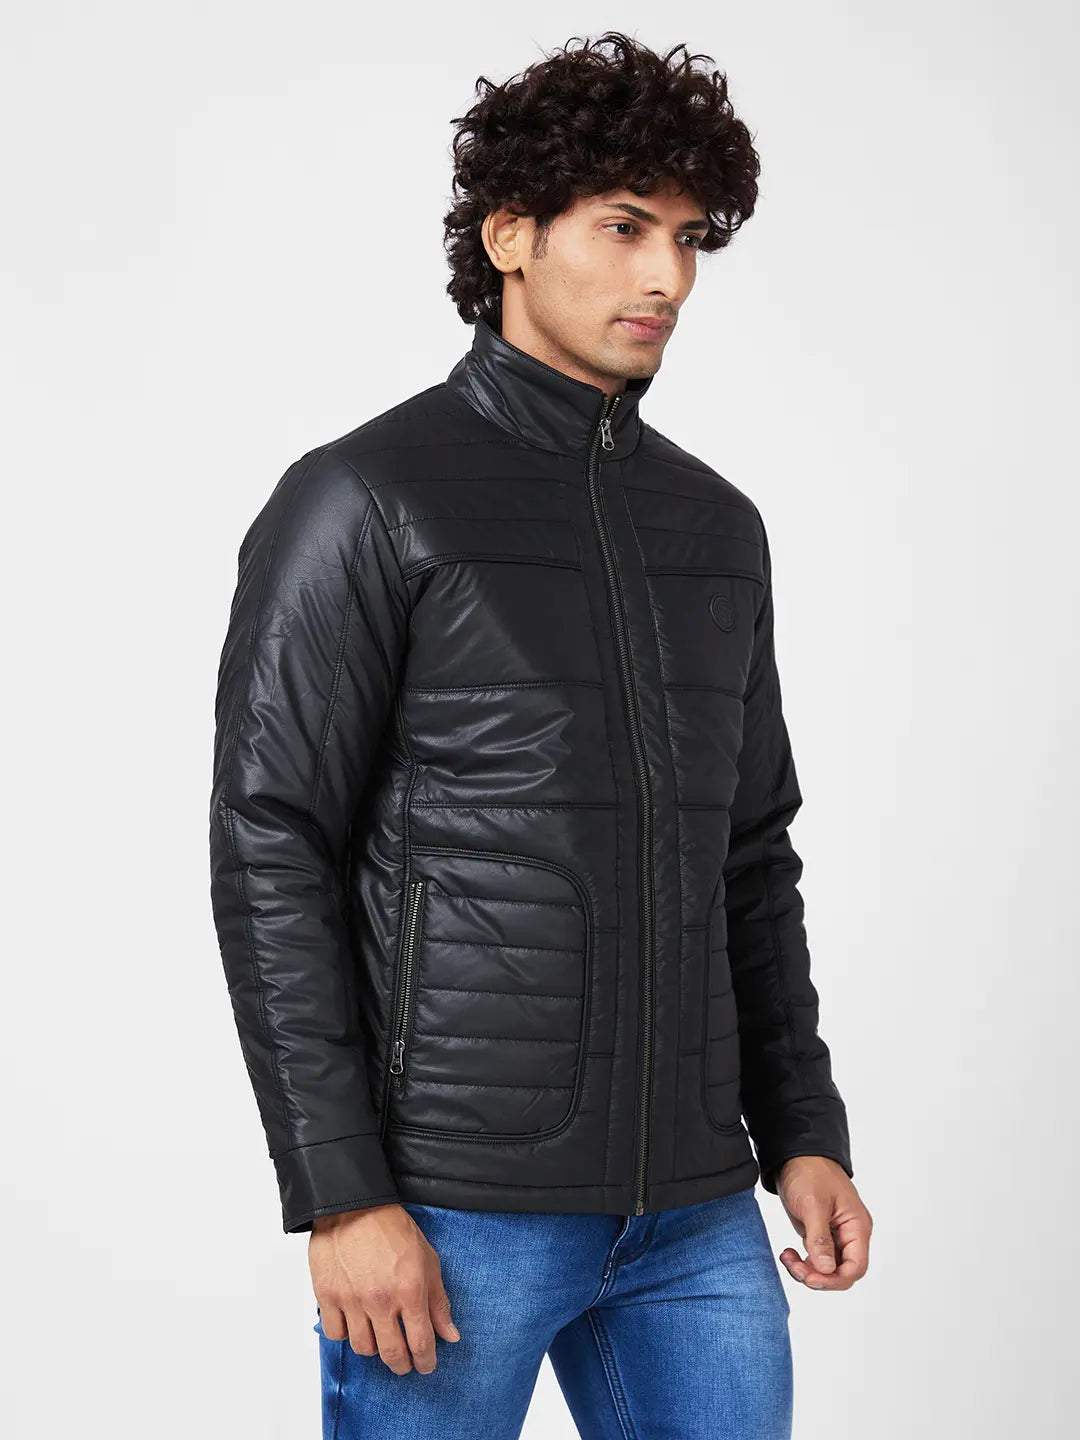 MEN'S LEATHER LOOK JACKET WITH CHEST SILICON BADGE